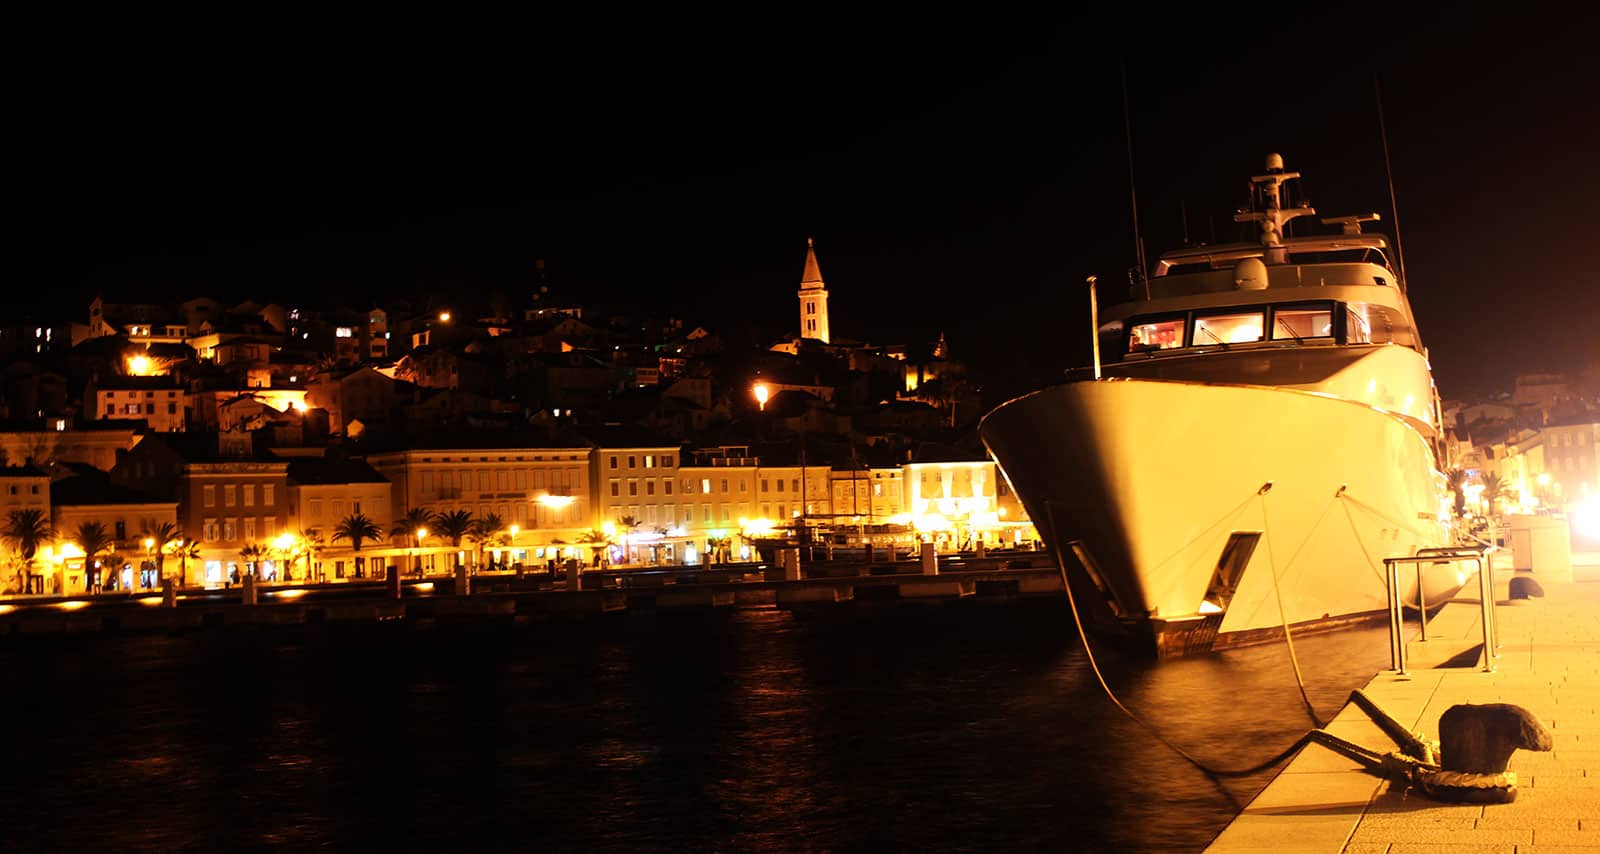 Seaside town at night with a big yacht.